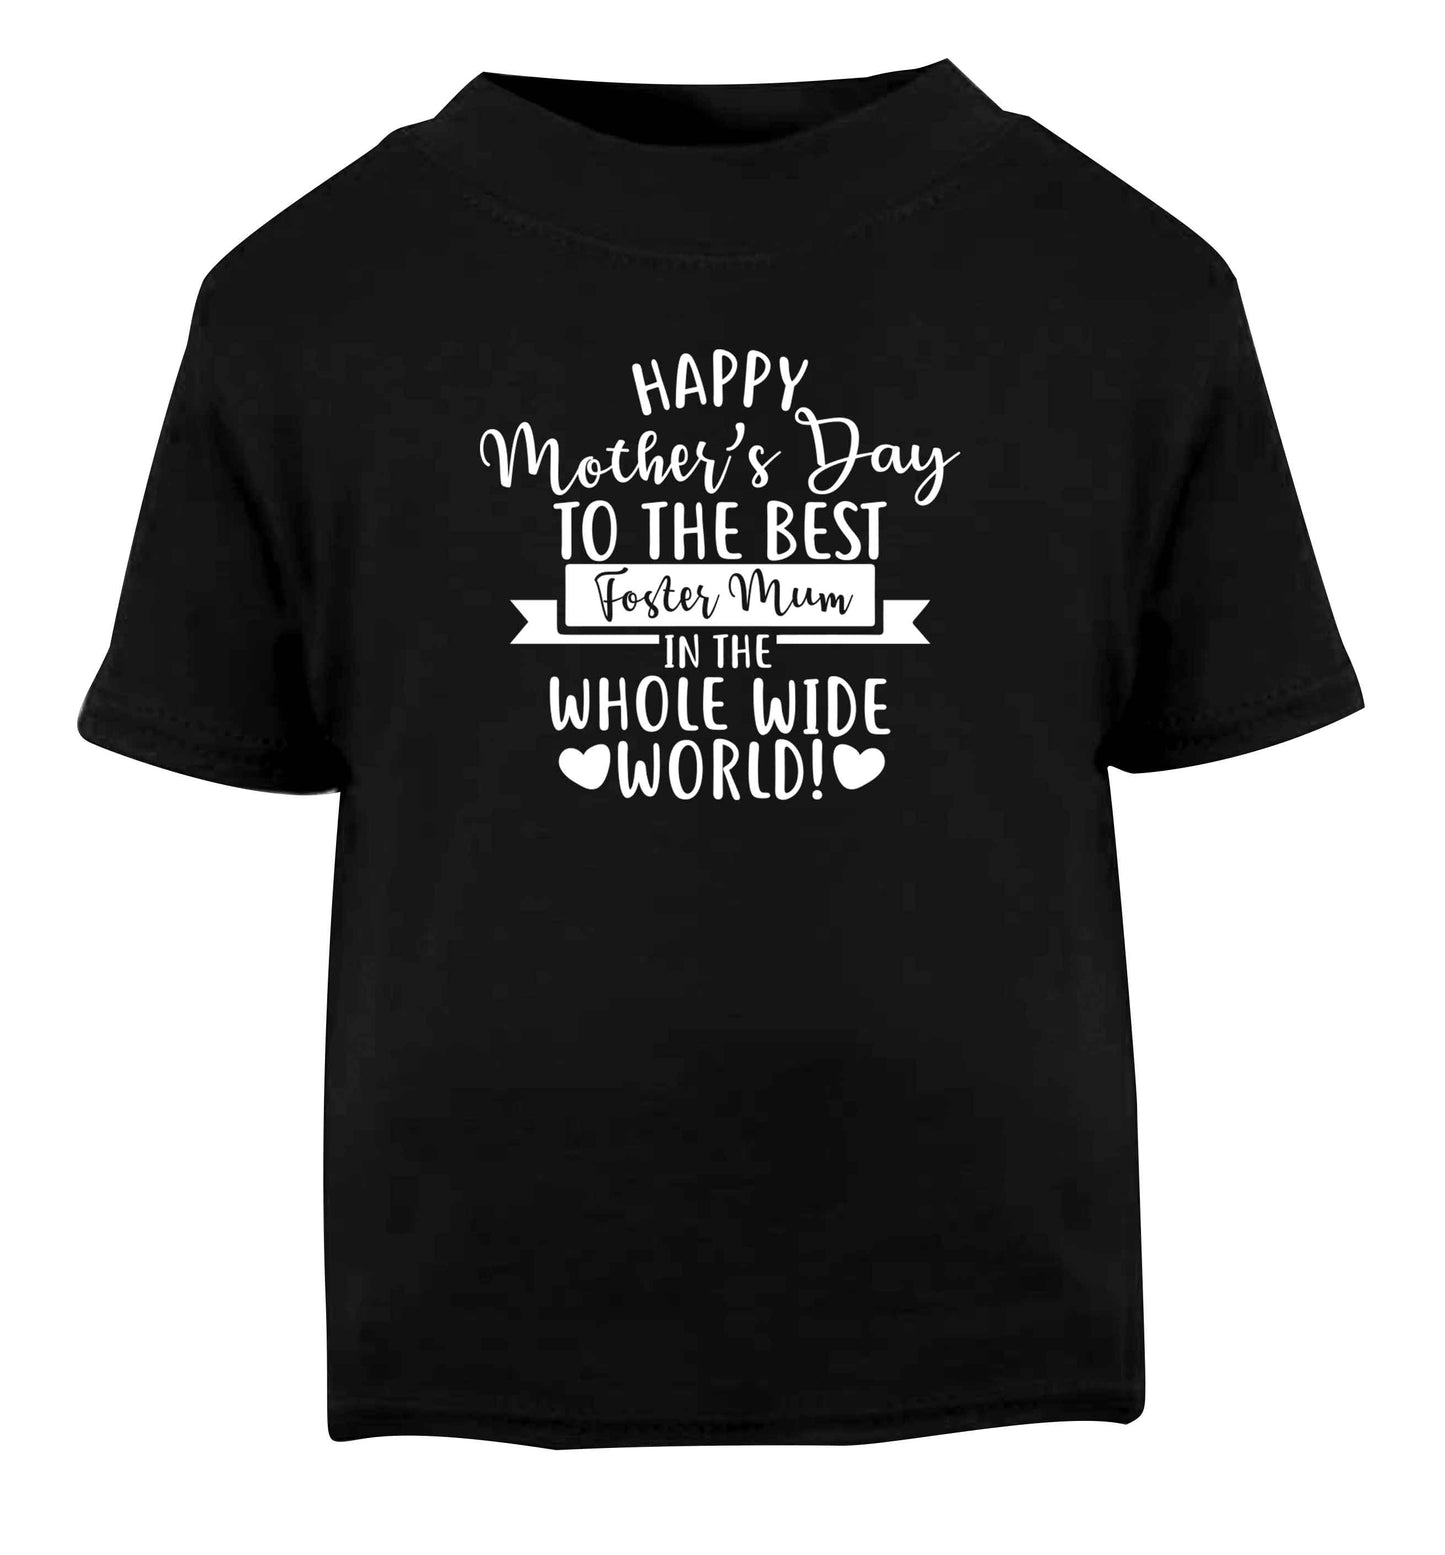 Happy mother's day to the best foster mum in the world Black baby toddler Tshirt 2 years